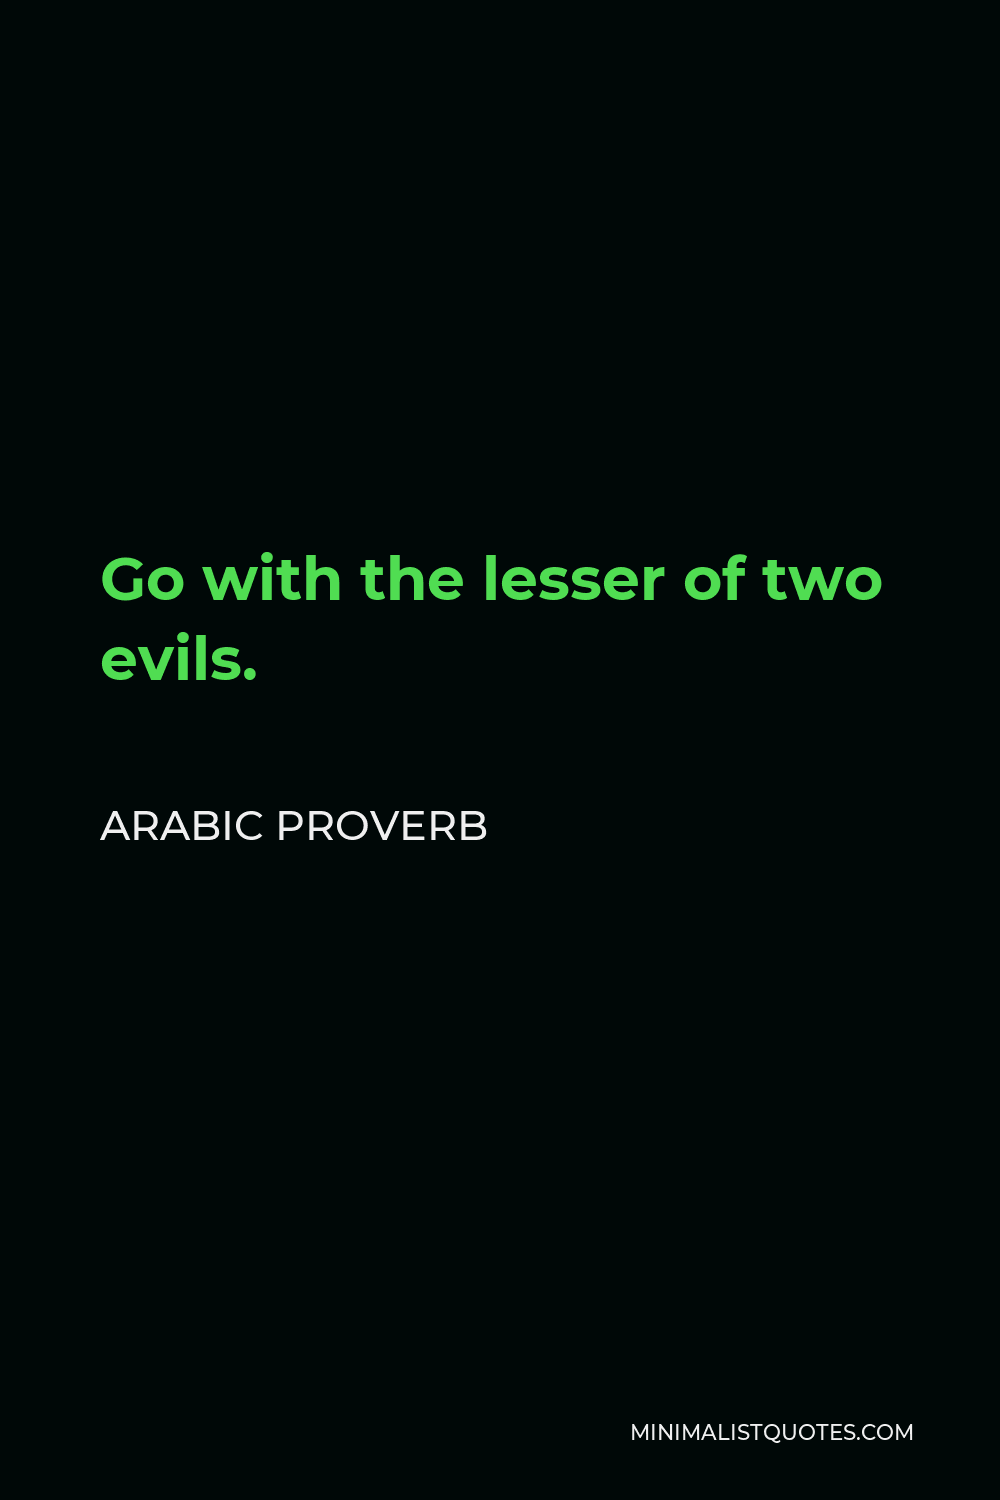 Arabic Proverb Quote - Go with the lesser of two evils.